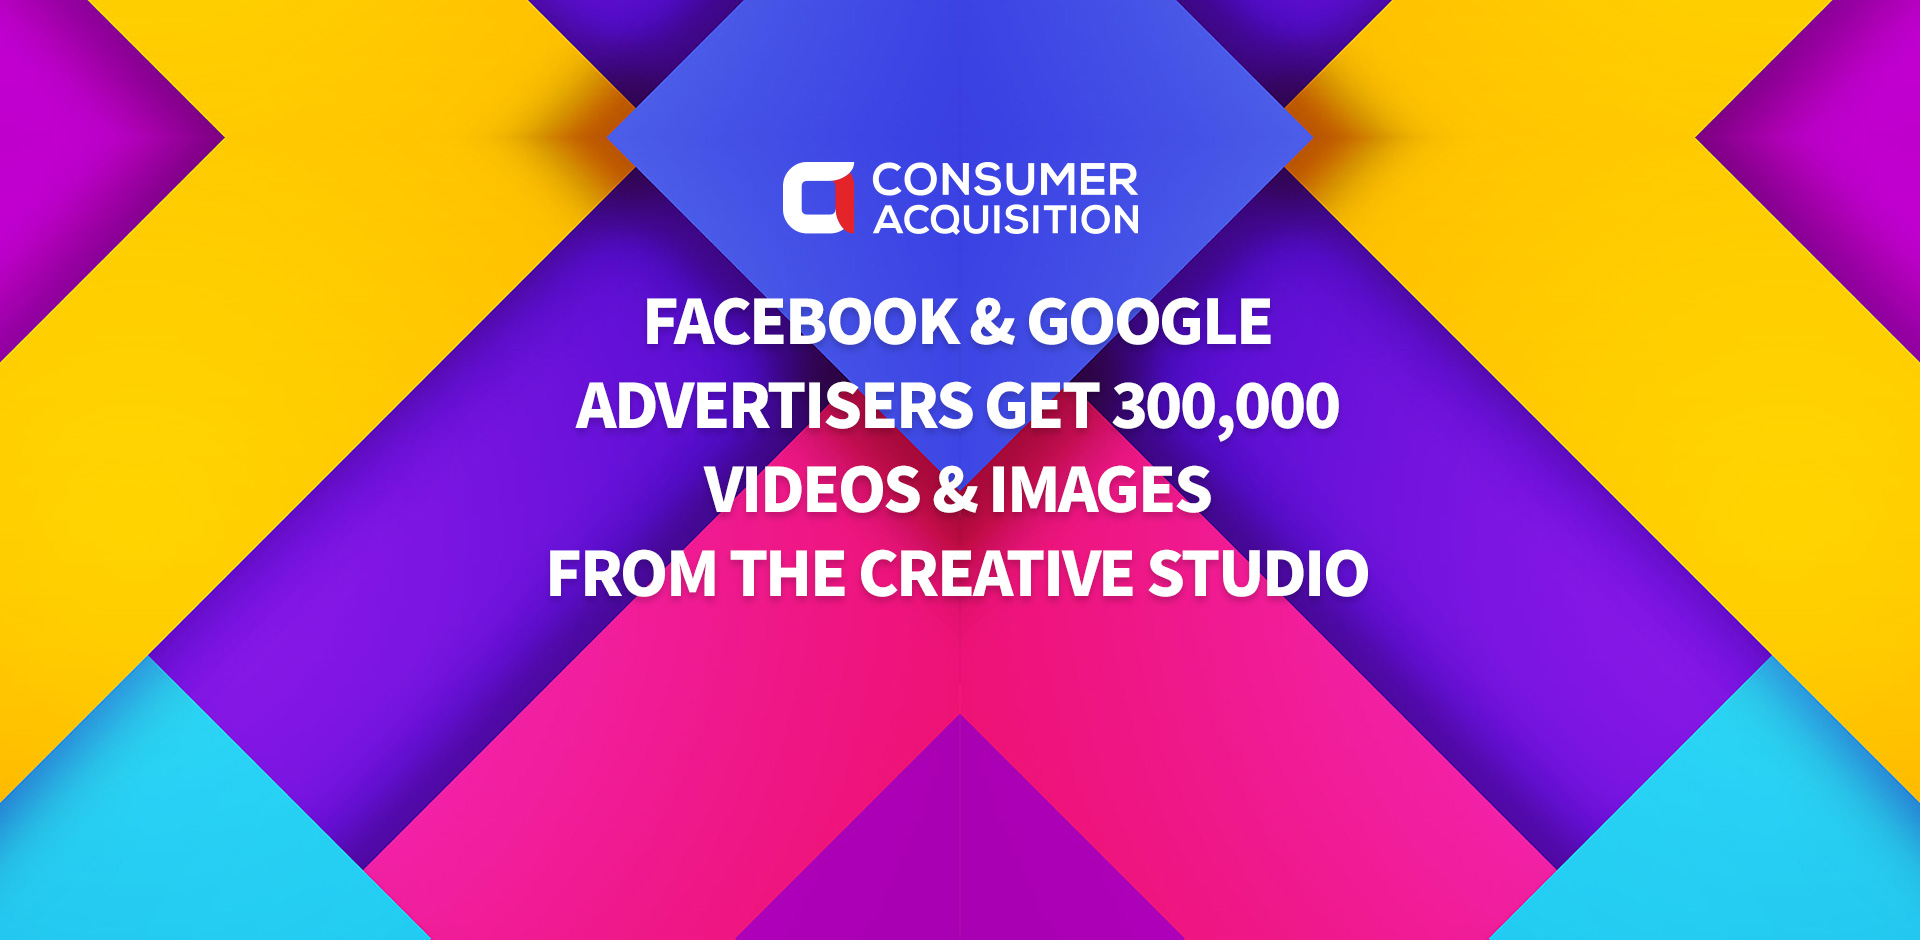 Facebook & Google Advertisers Get 300,000 Videos & Images from The Creative Studio